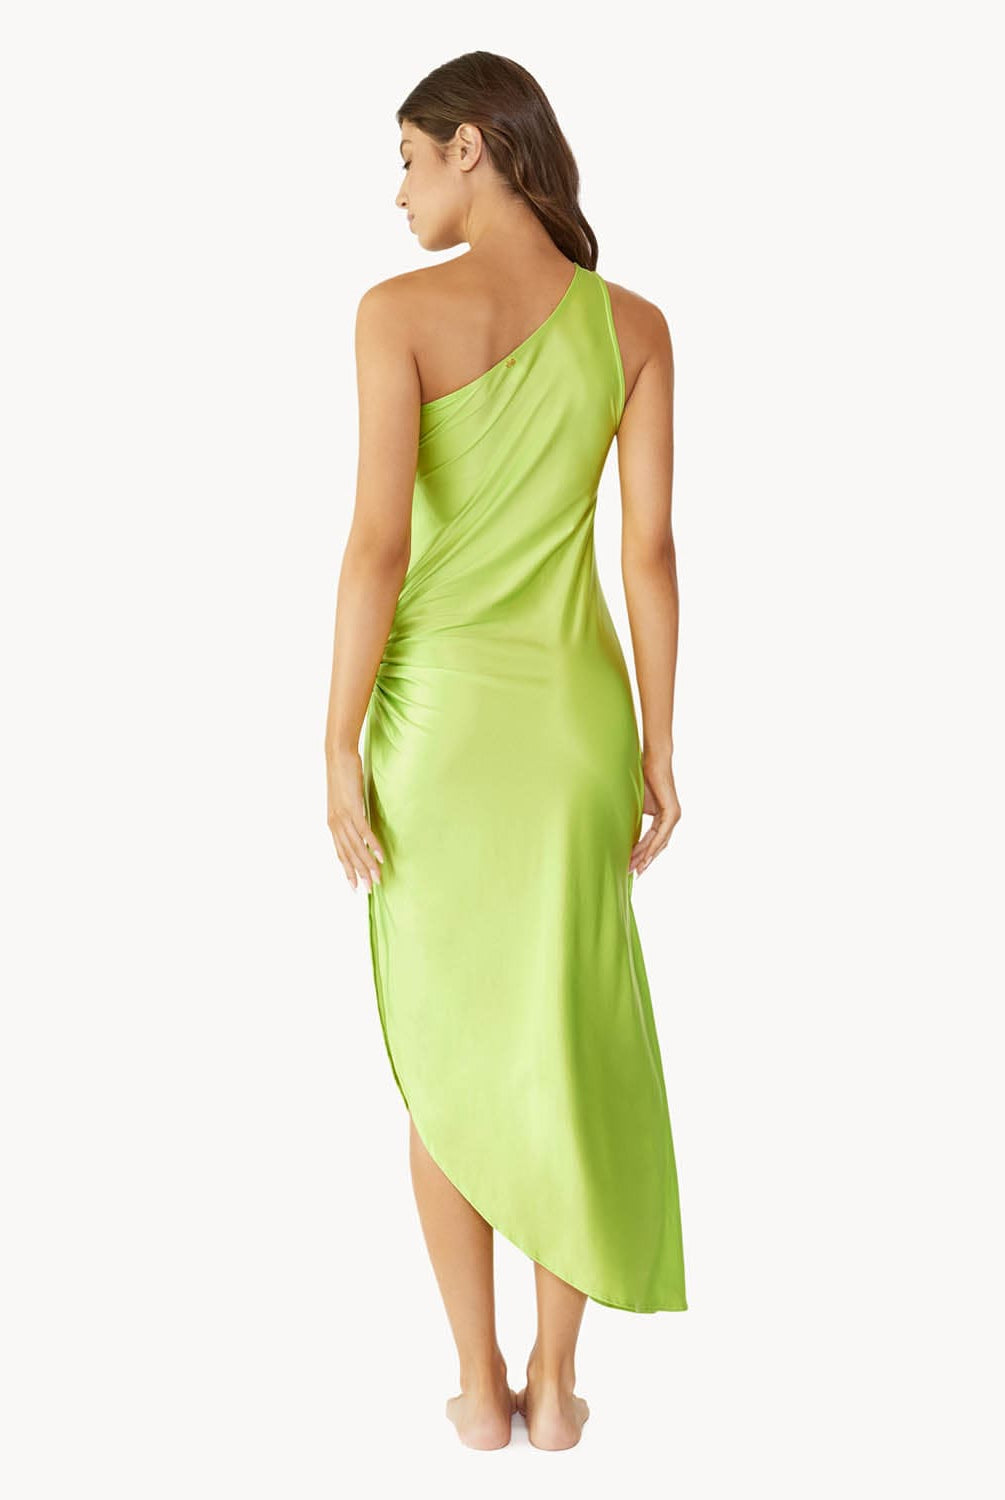 Brunette woman wearing a lime green one-shoulder dress with side slit and ring detail facing backwards towards a white wall.